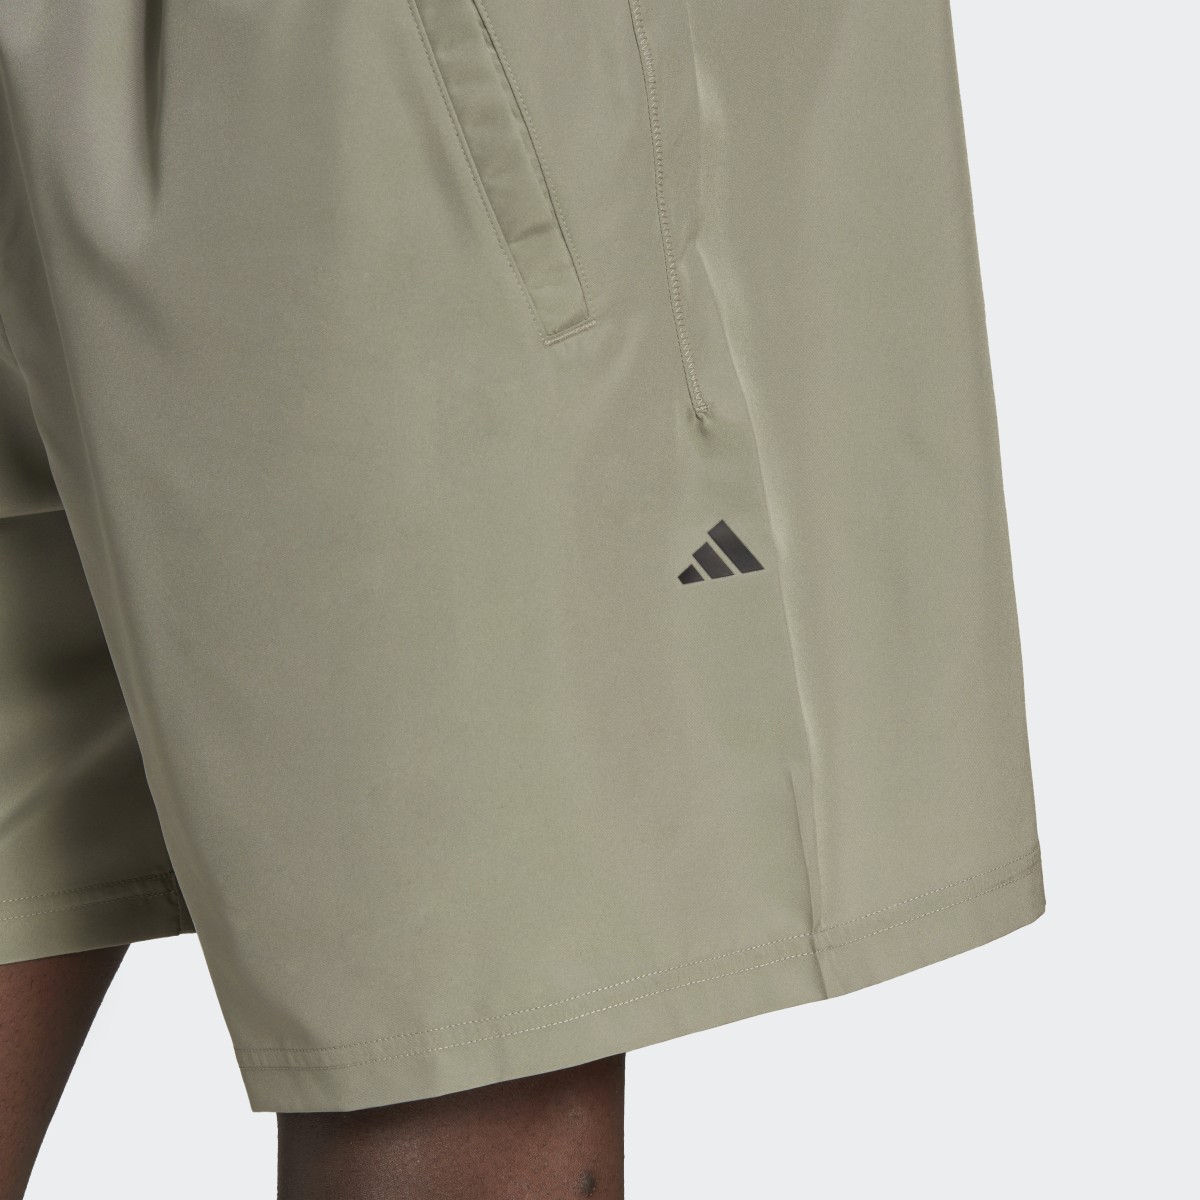 Adidas Train Essentials Made to Be Remade Training Shorts. 7